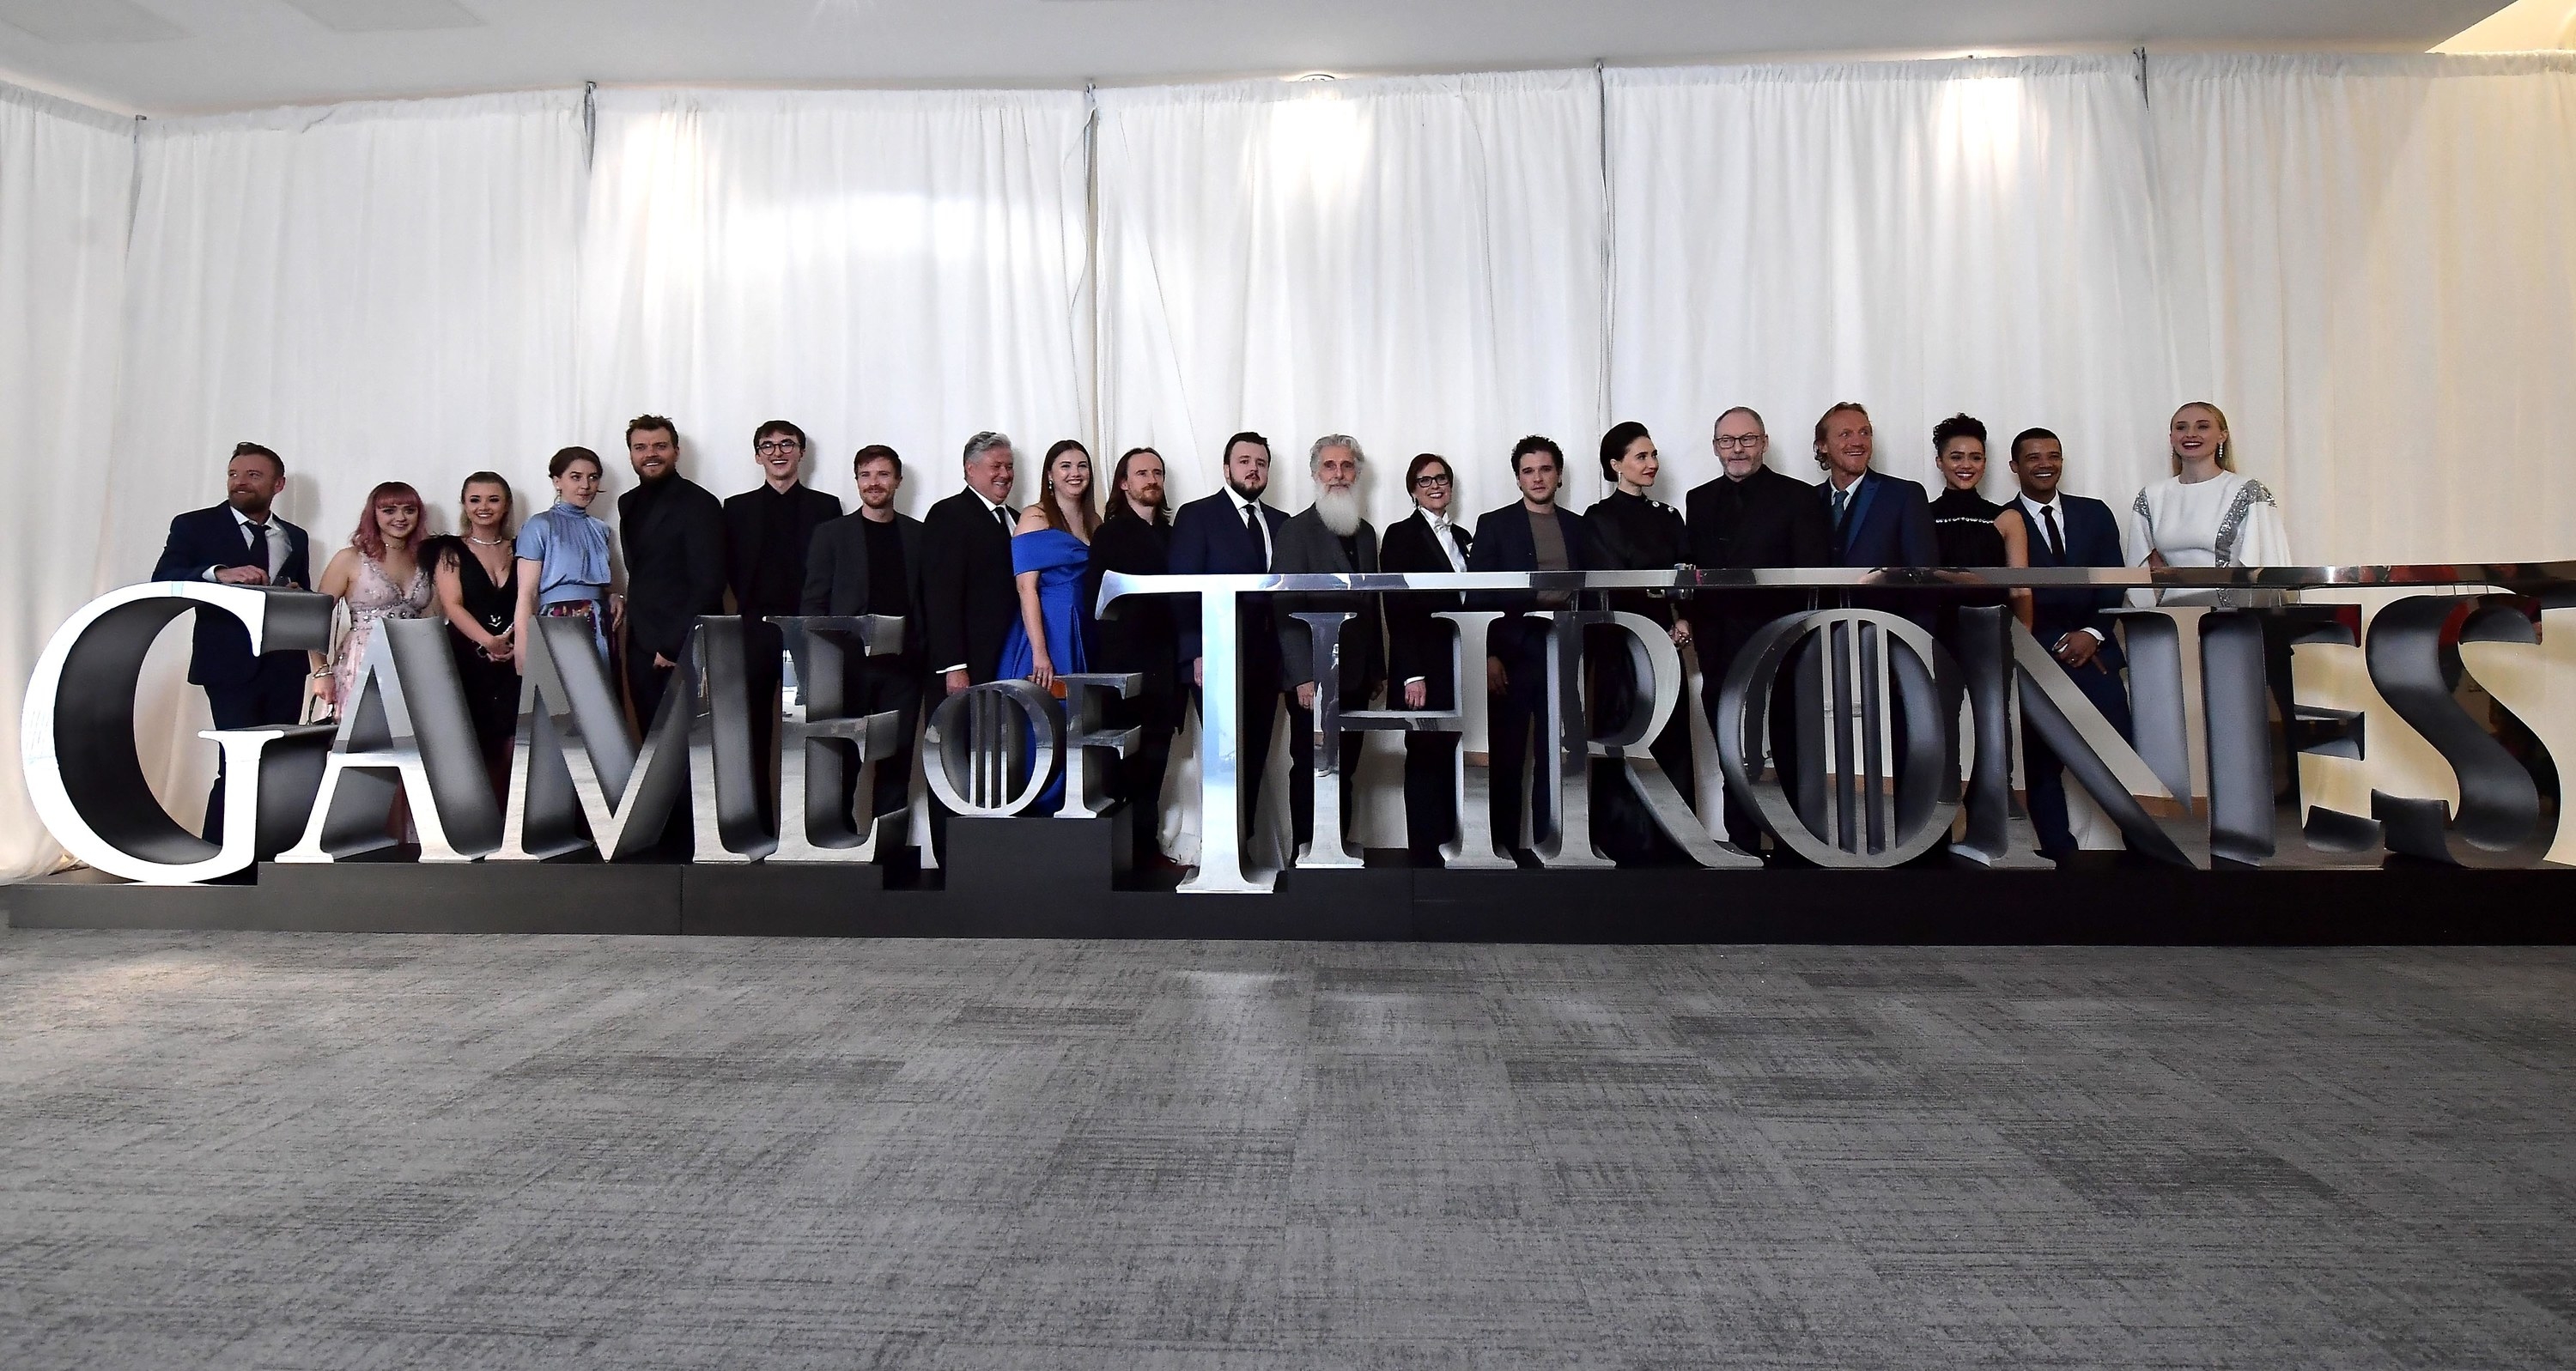 The Game of Thrones cast at a press event